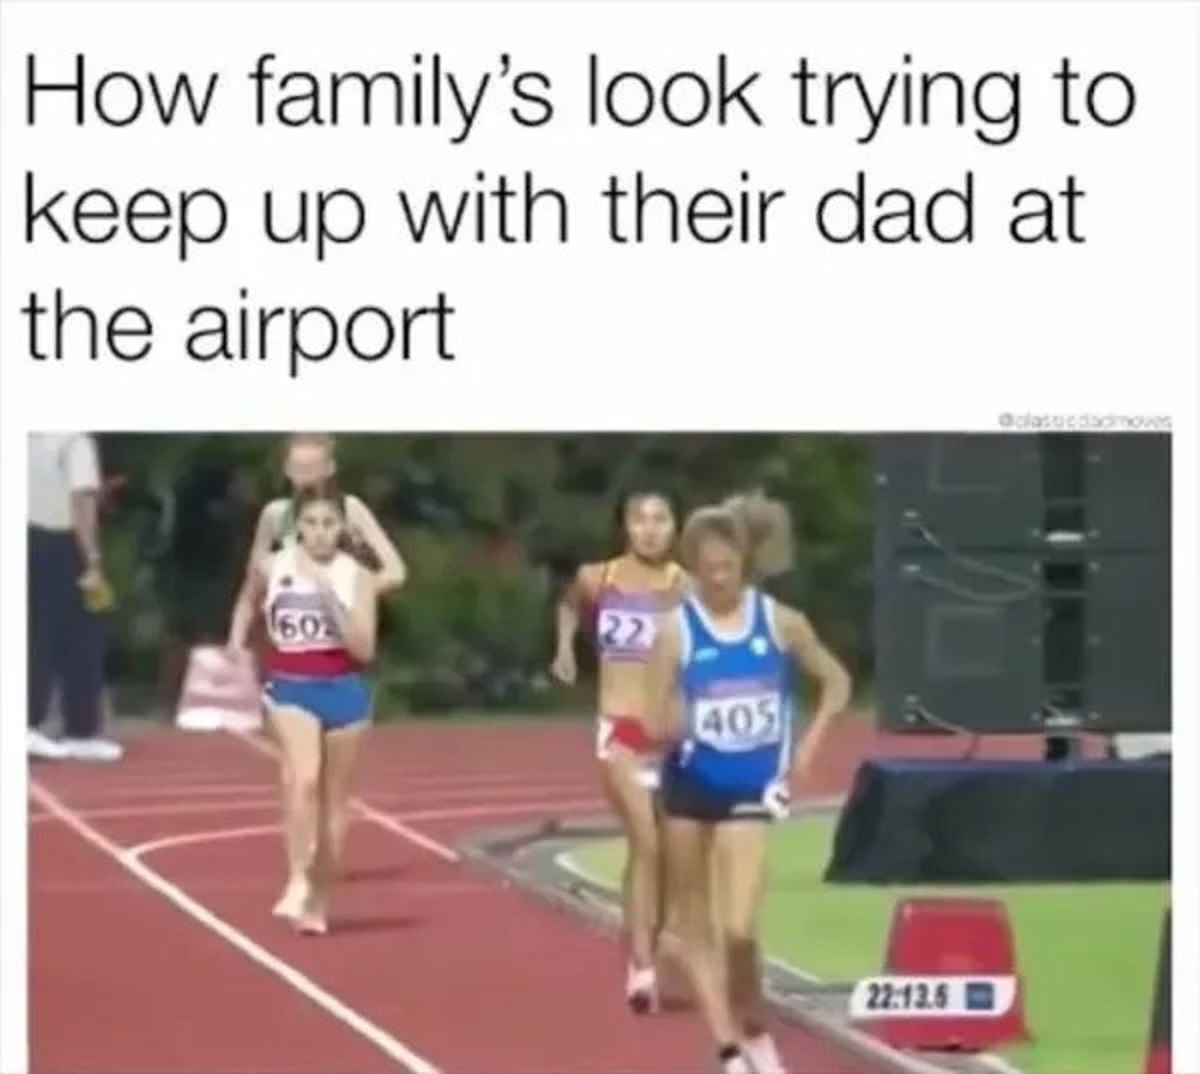 athlete - How family's look trying to keep up with their dad at the airport 602 22 405 .5 classedad